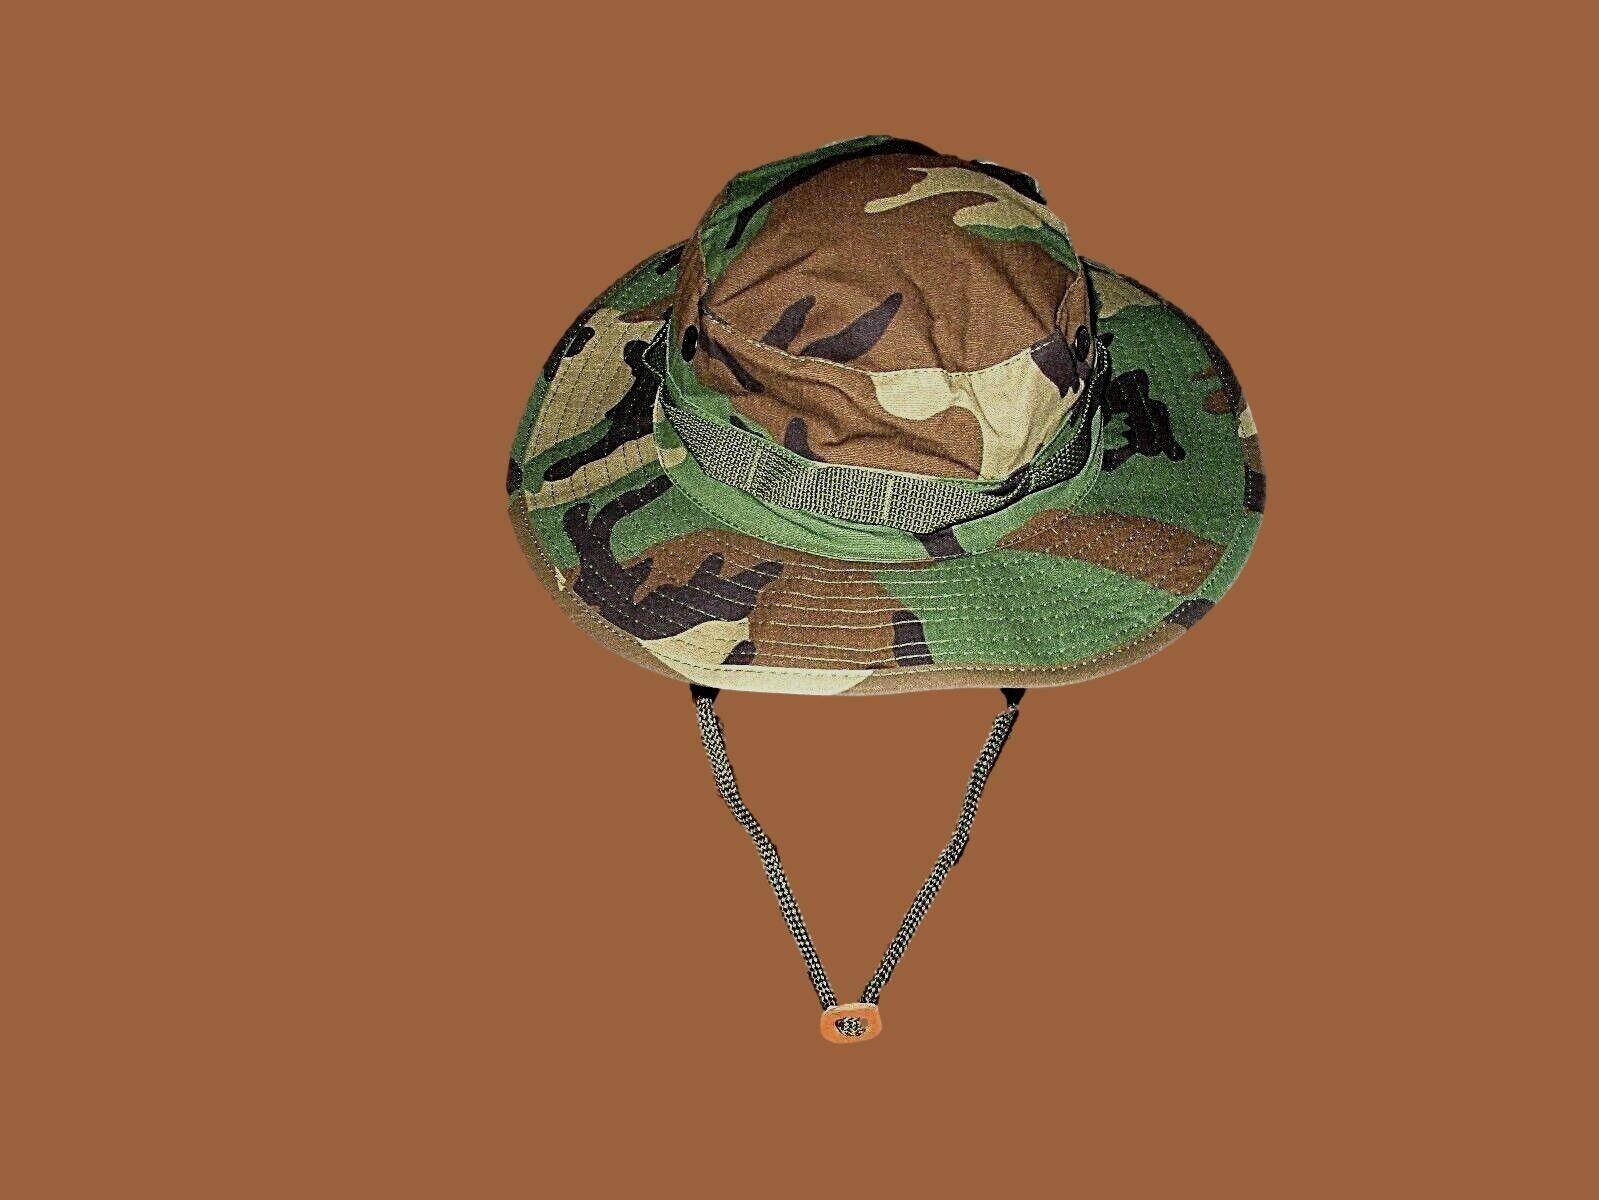 U.S MILITARY STYLE HOT WEATHER BOONIE HAT WOODLAND CAMOUFLAGE RIP-STOP X-LARGE